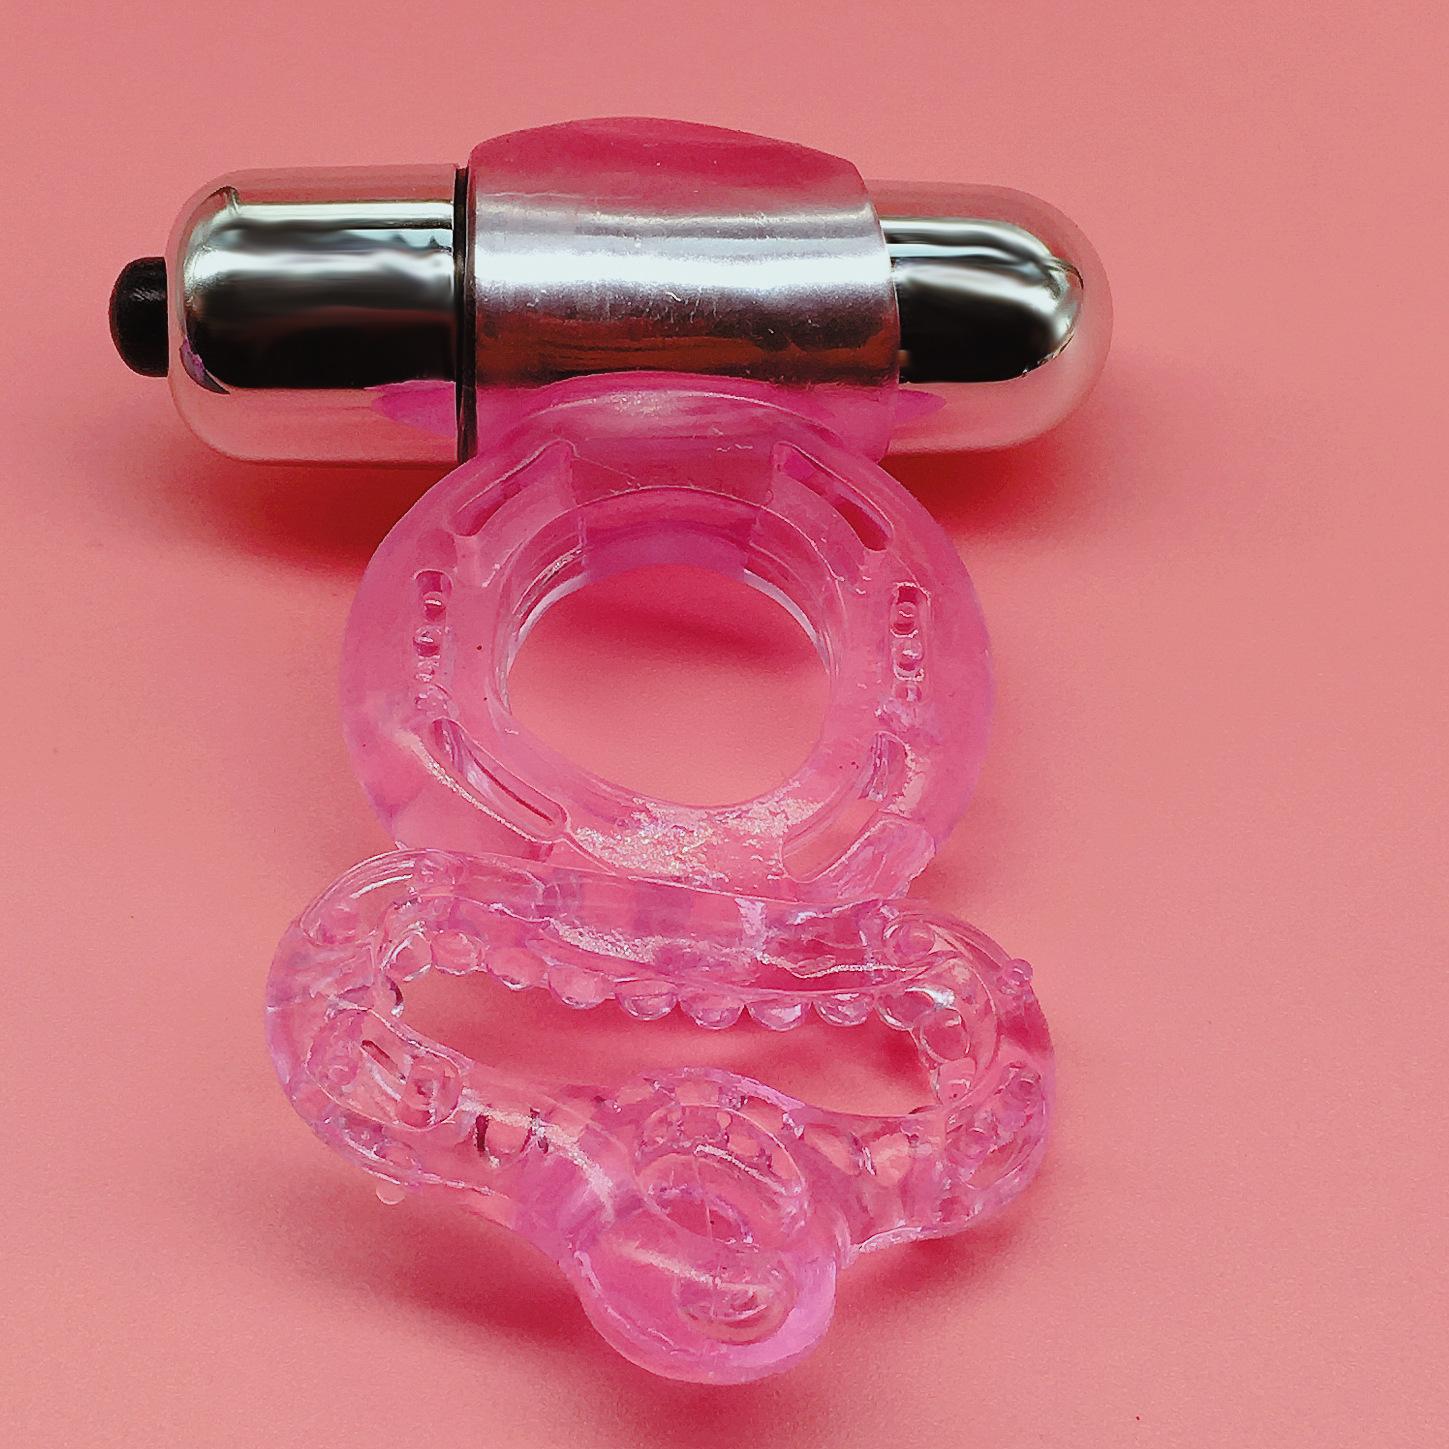 Cock Ring Toys Sex Adult For Men Masturbator Male Adult Sex Toy Wholesale Aged 18 Soft Silicone 68*32*35 Mm Under 30 Dbs